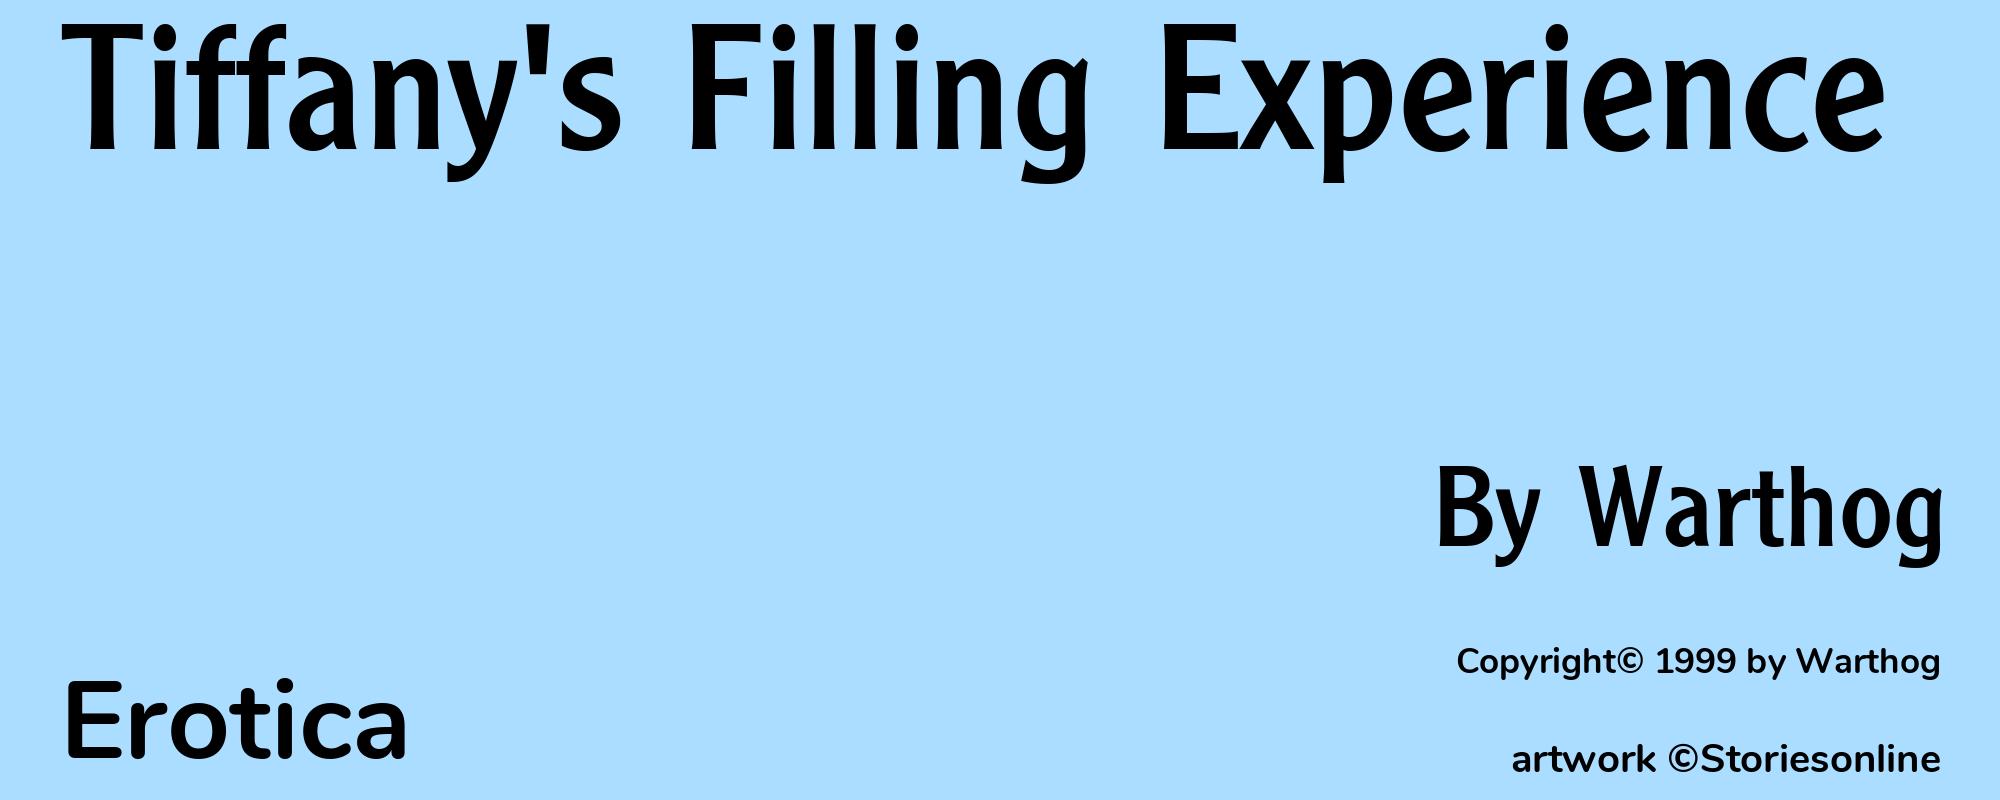 Tiffany's Filling Experience - Cover